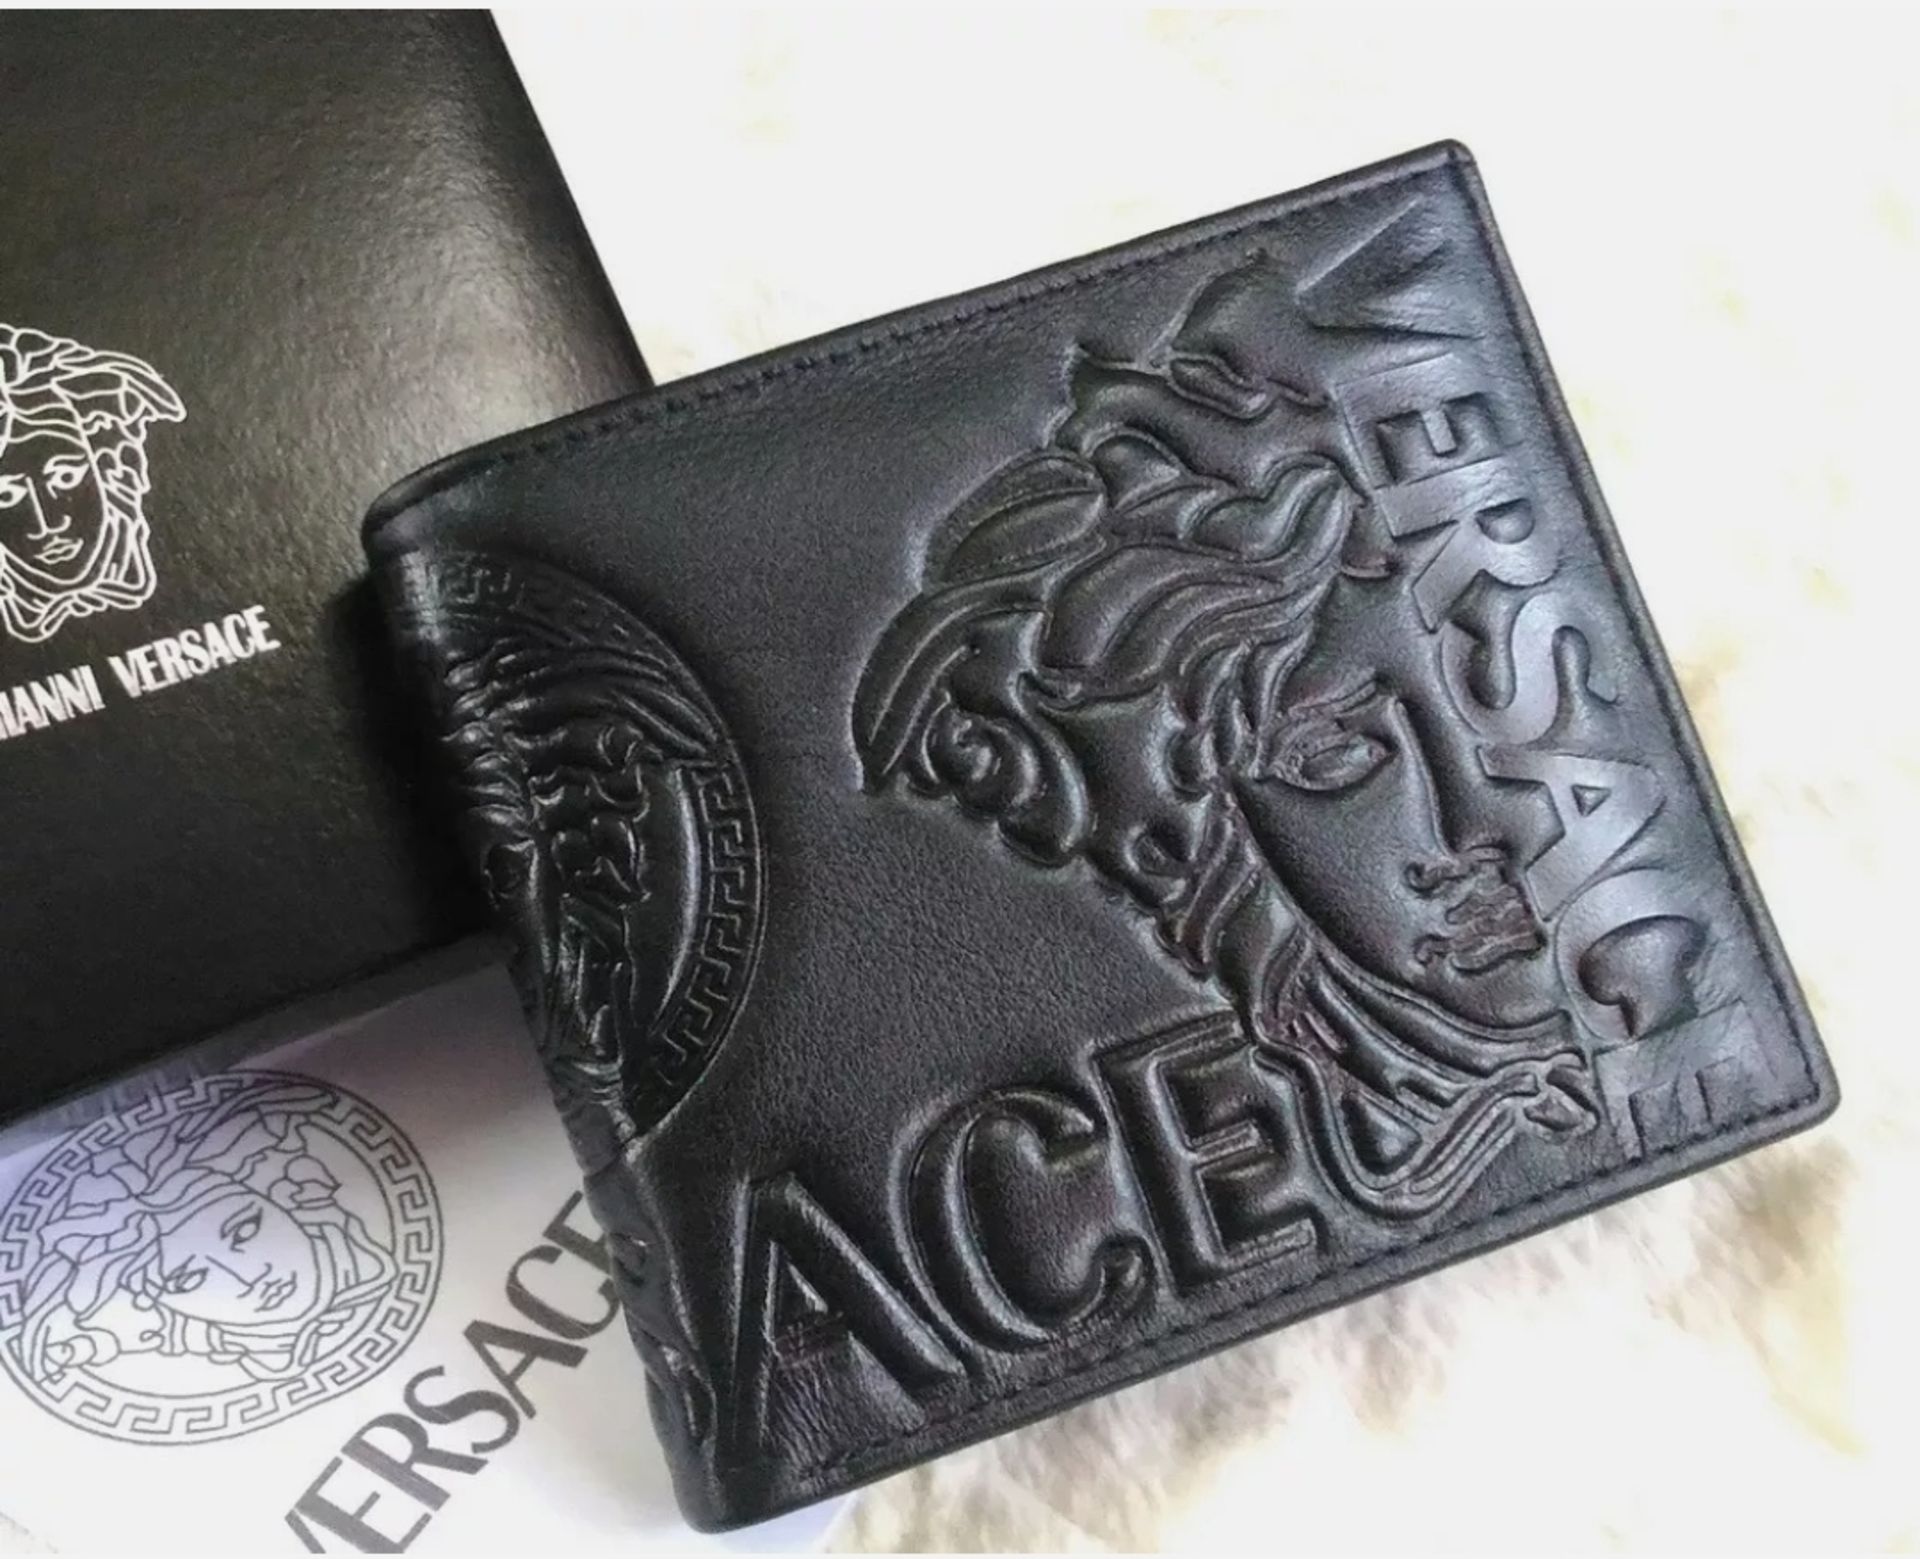 versace men's leather wallet - new with box - Image 5 of 9